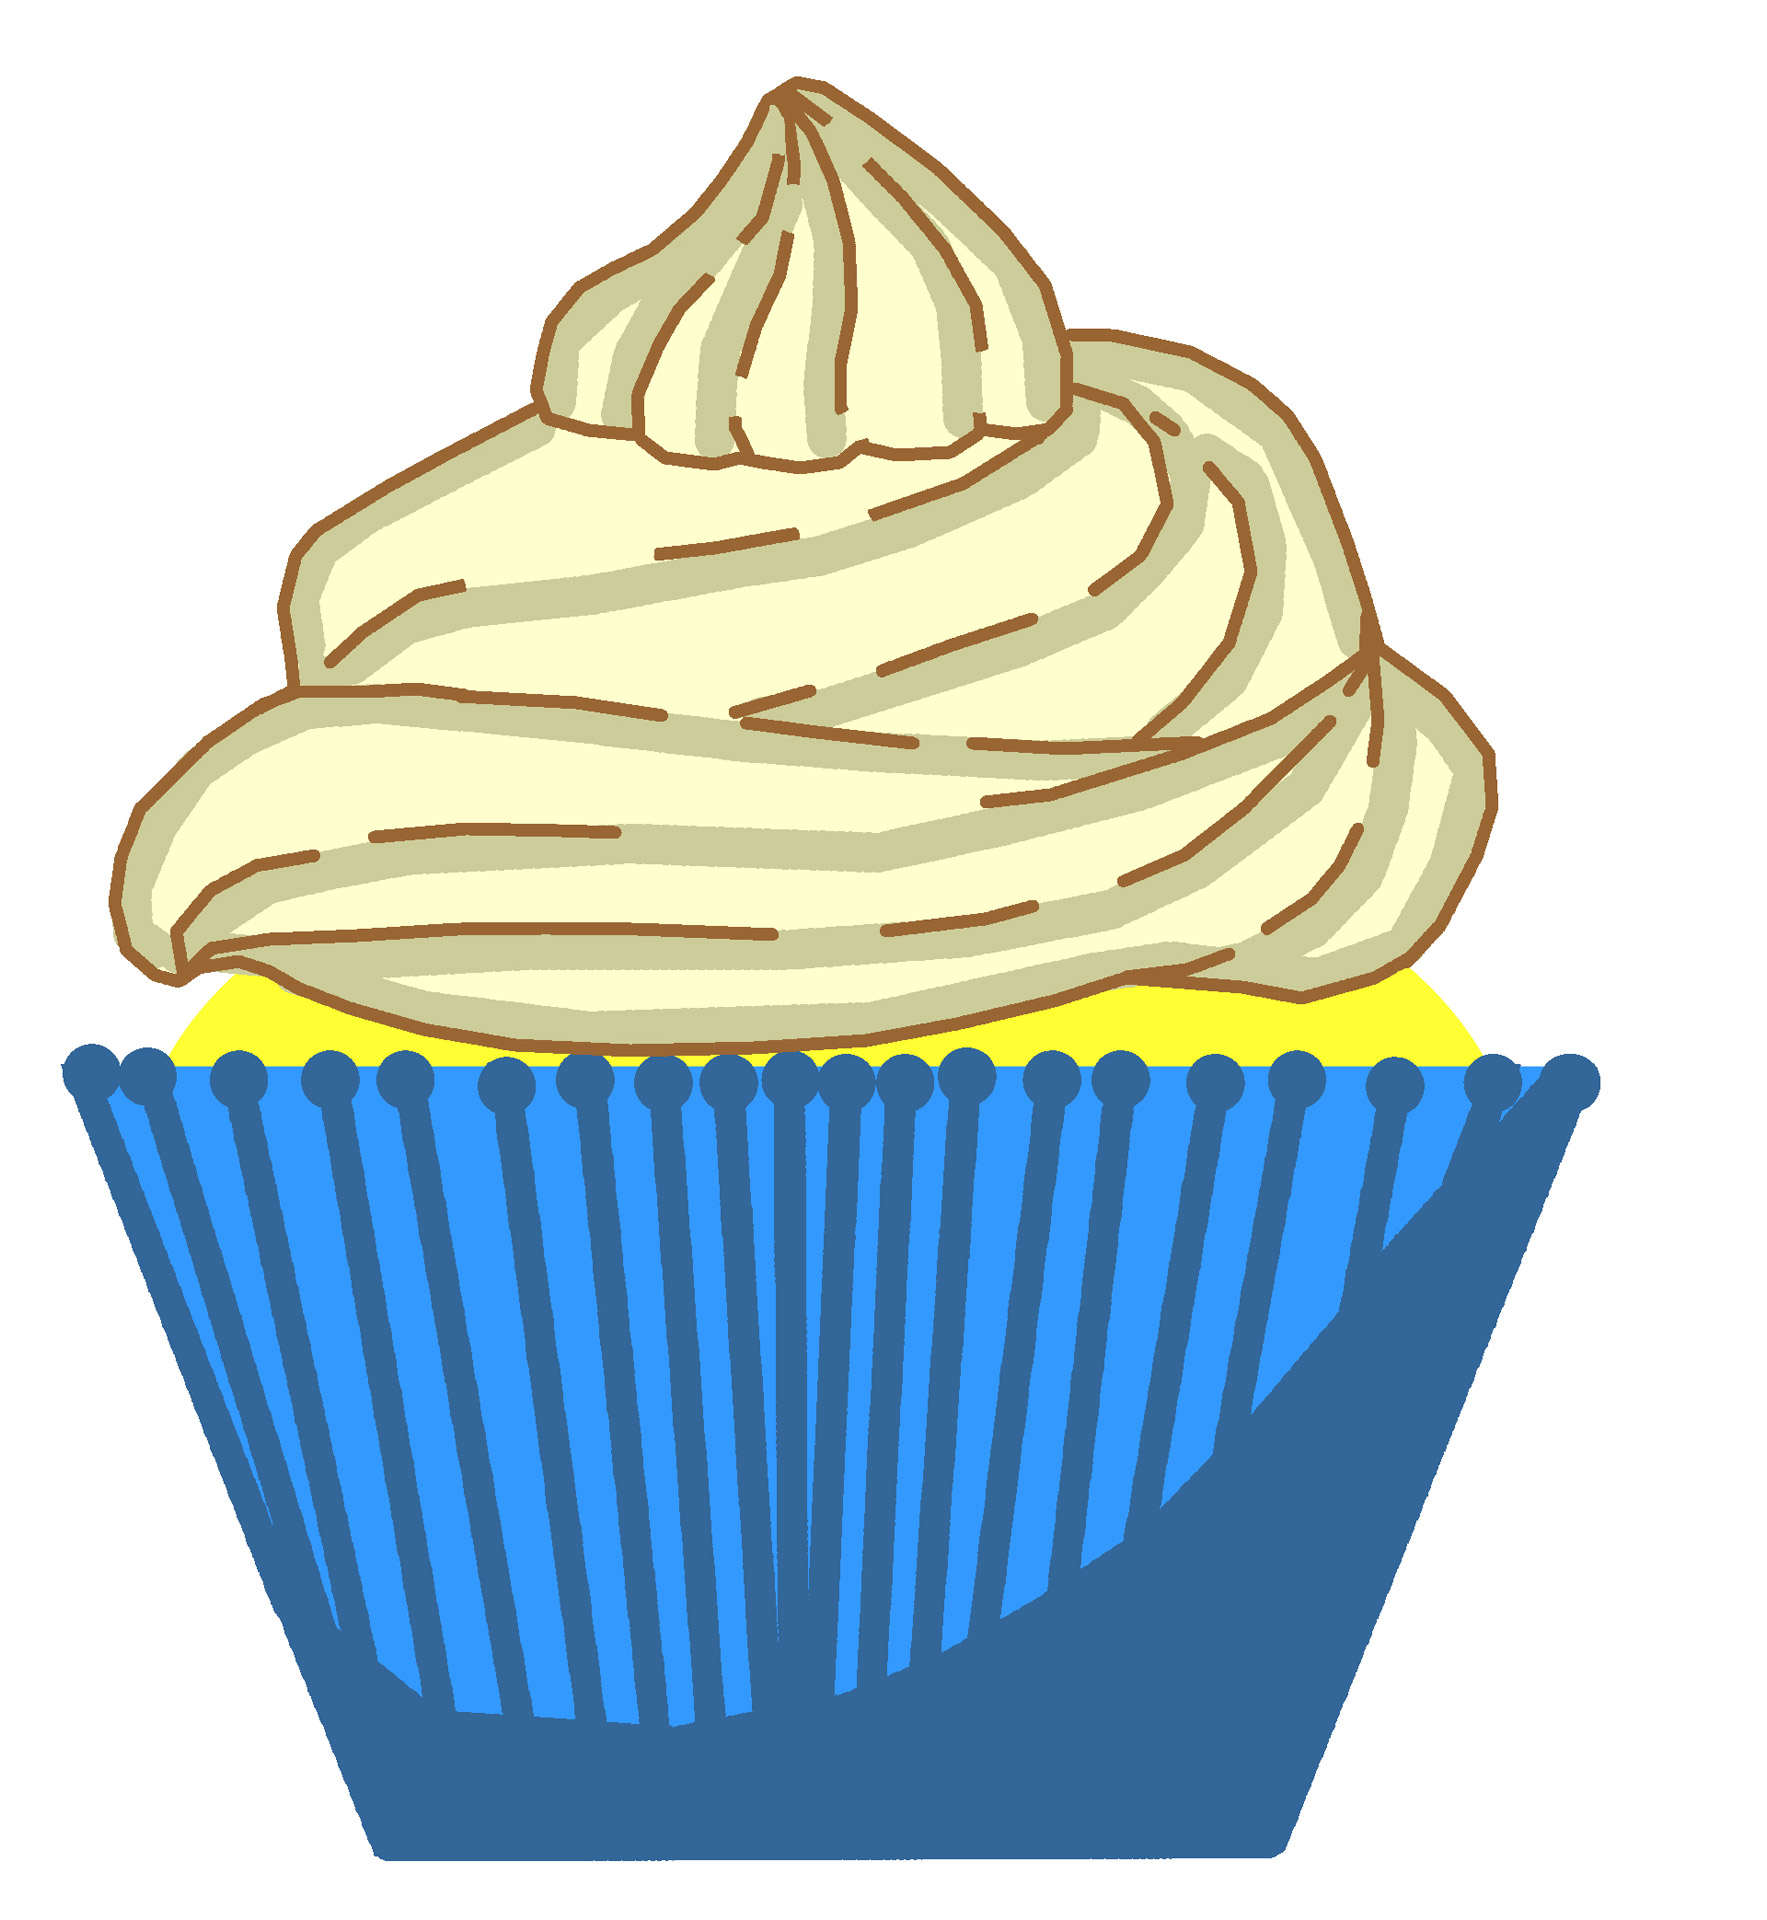 Cupcakes With Sprinkles Clipart | Clipart Panda - Free Clipart Images